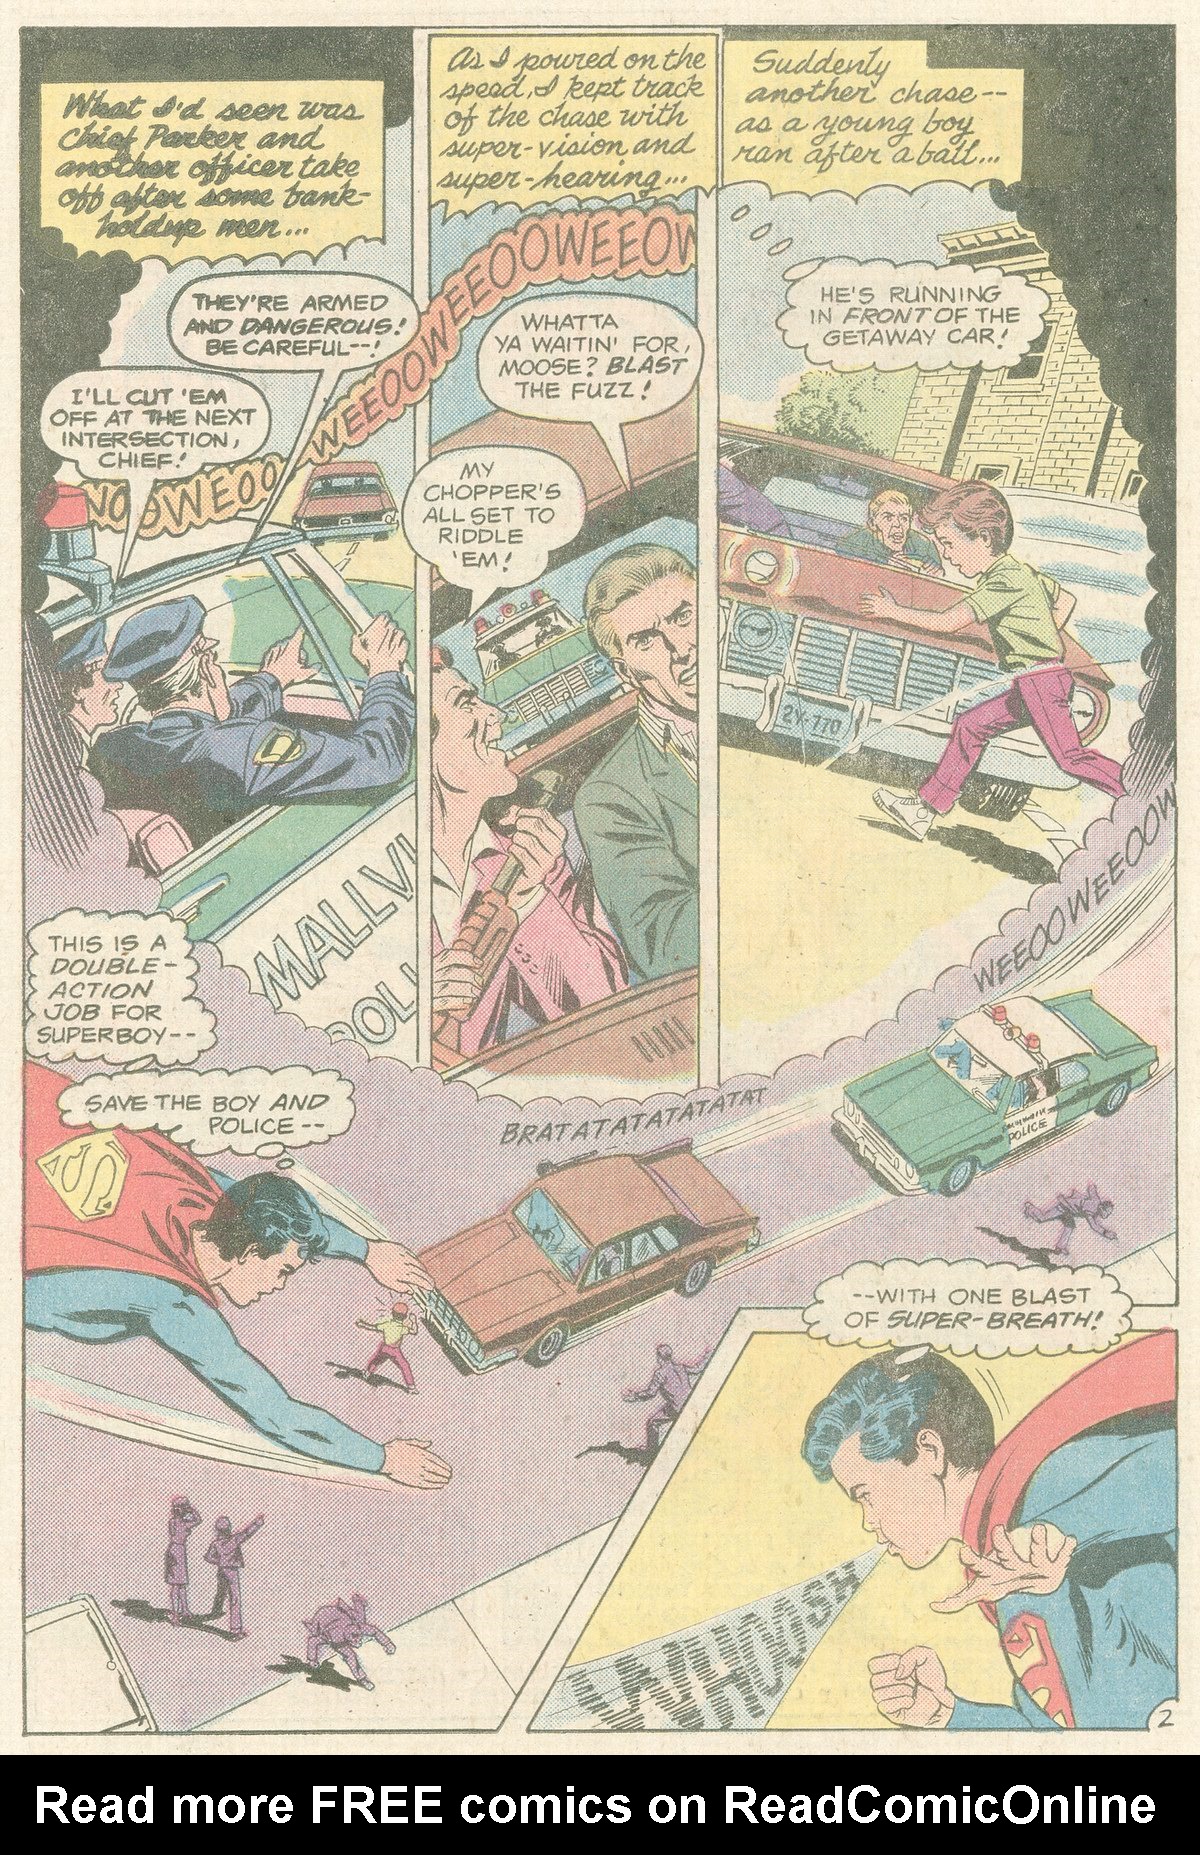 The New Adventures of Superboy 23 Page 21